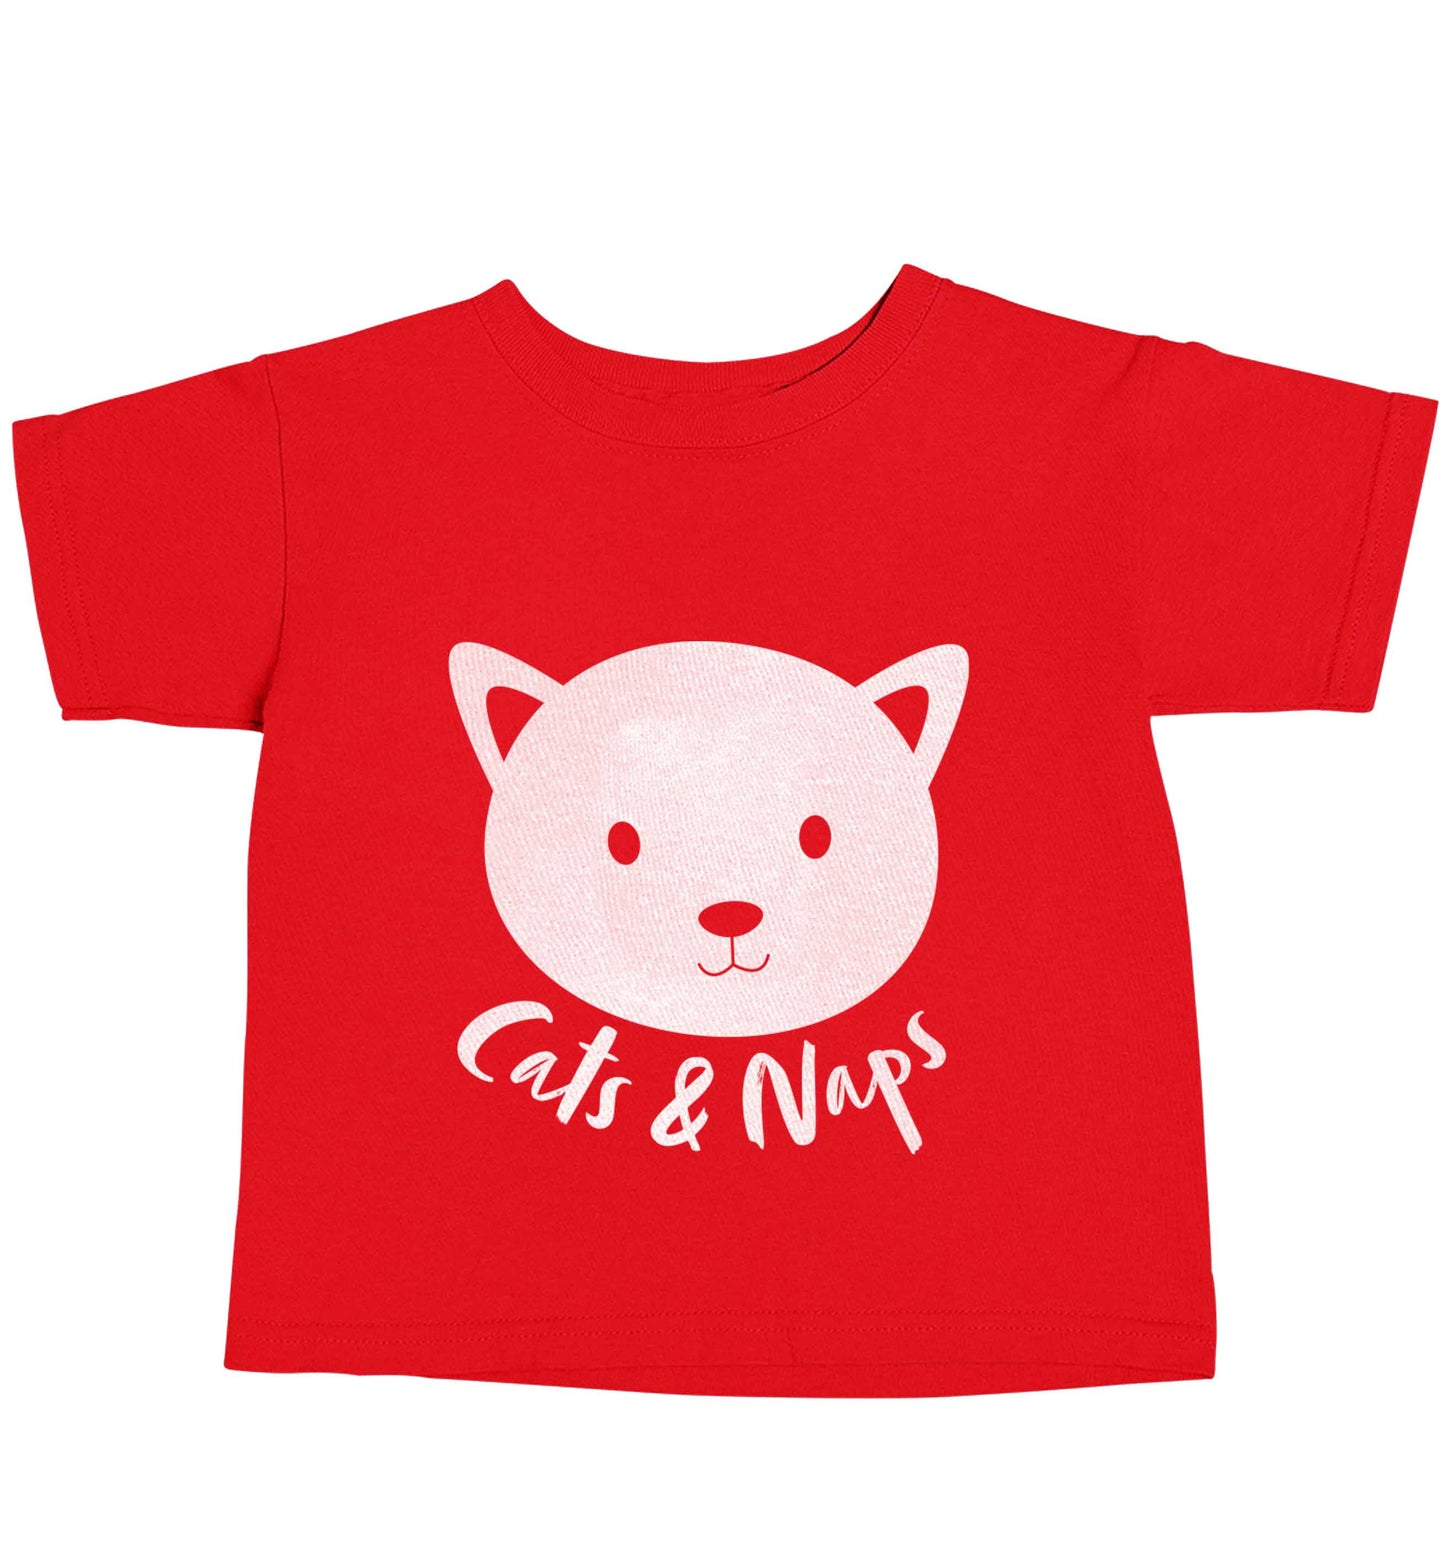 Cats and naps Kit red baby toddler Tshirt 2 Years